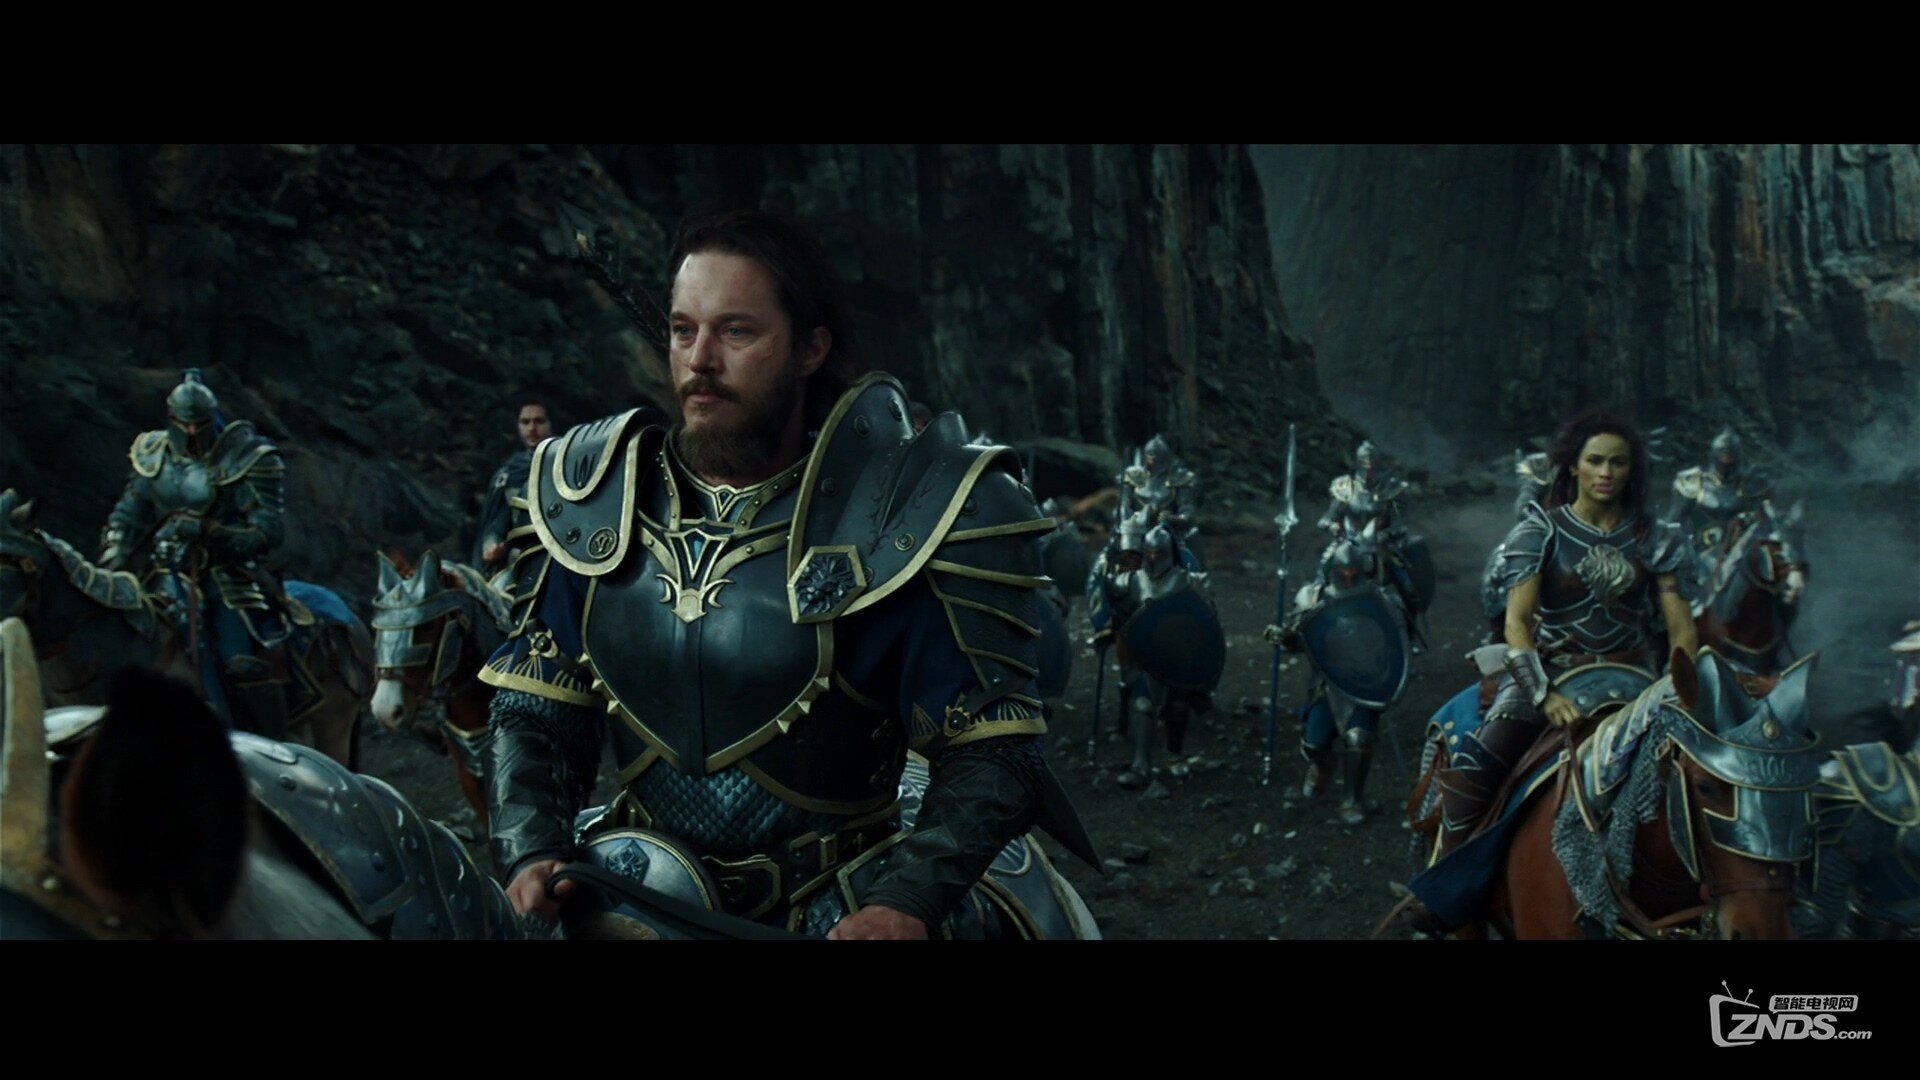 Warcraft_Trailer1_Texted_Stereo_PCM_1080p.mov_20160214_211601.669.jpg